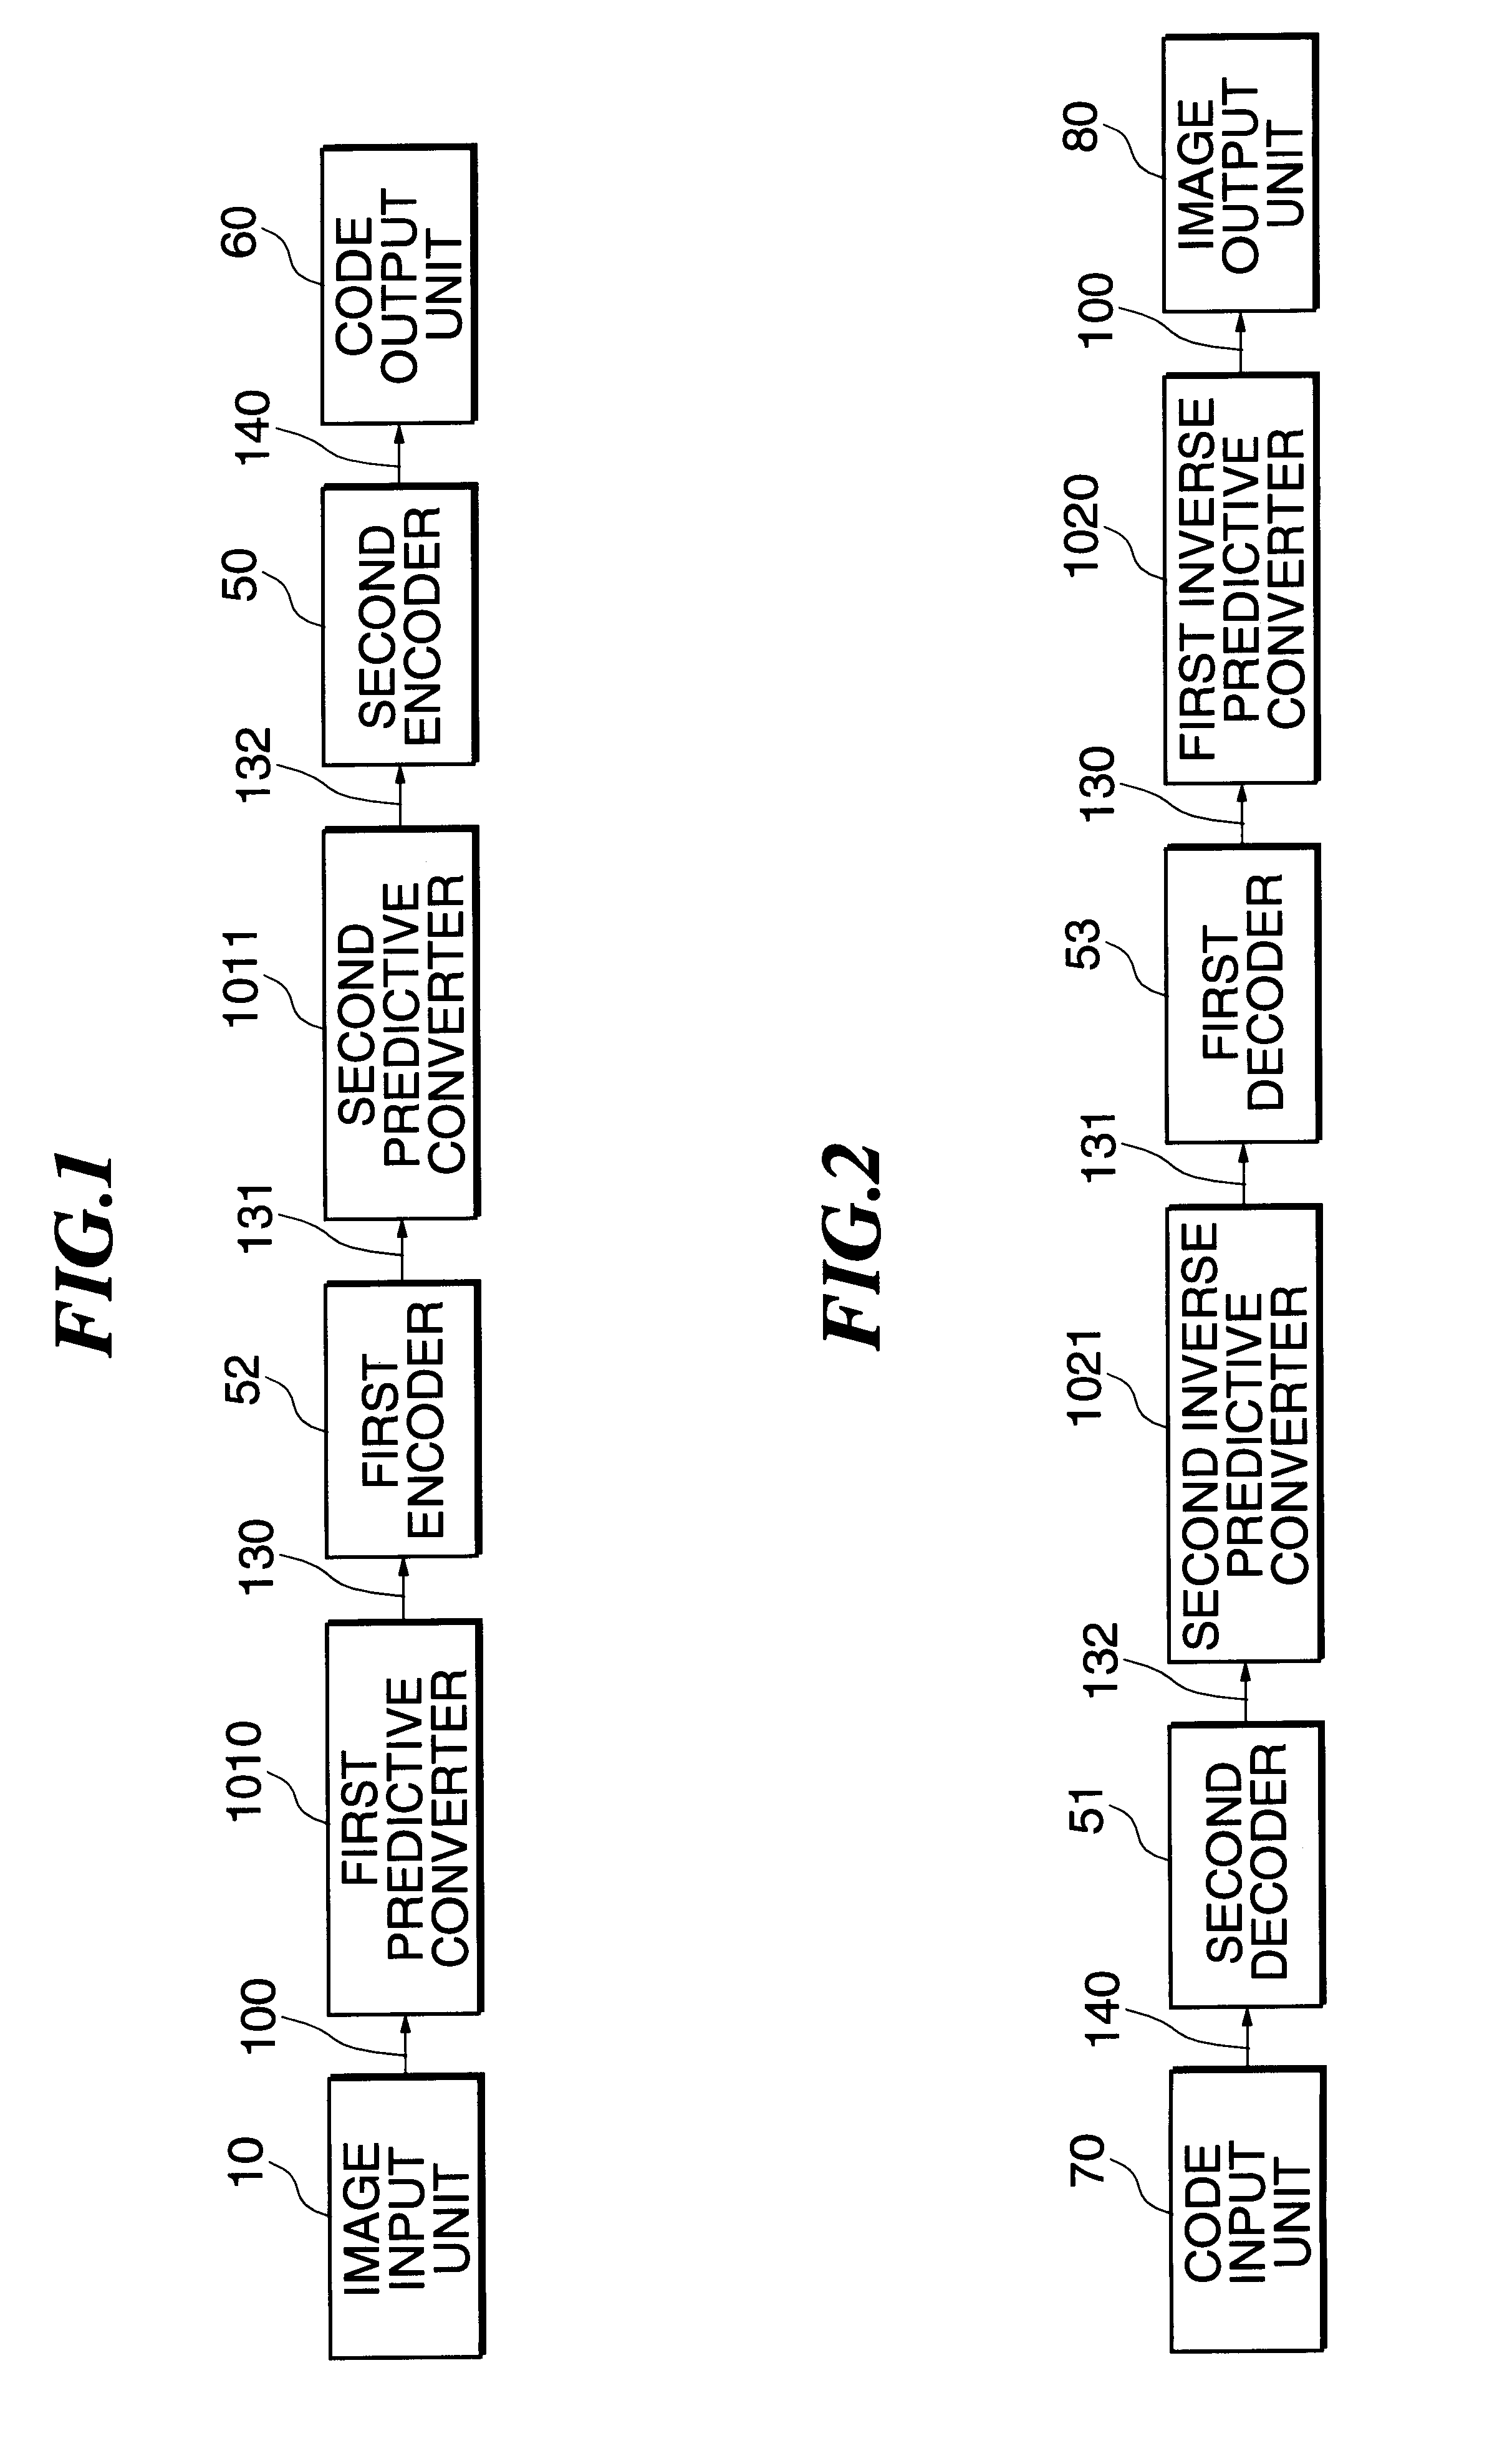 Image encoding system, image decoding system and methods therefor